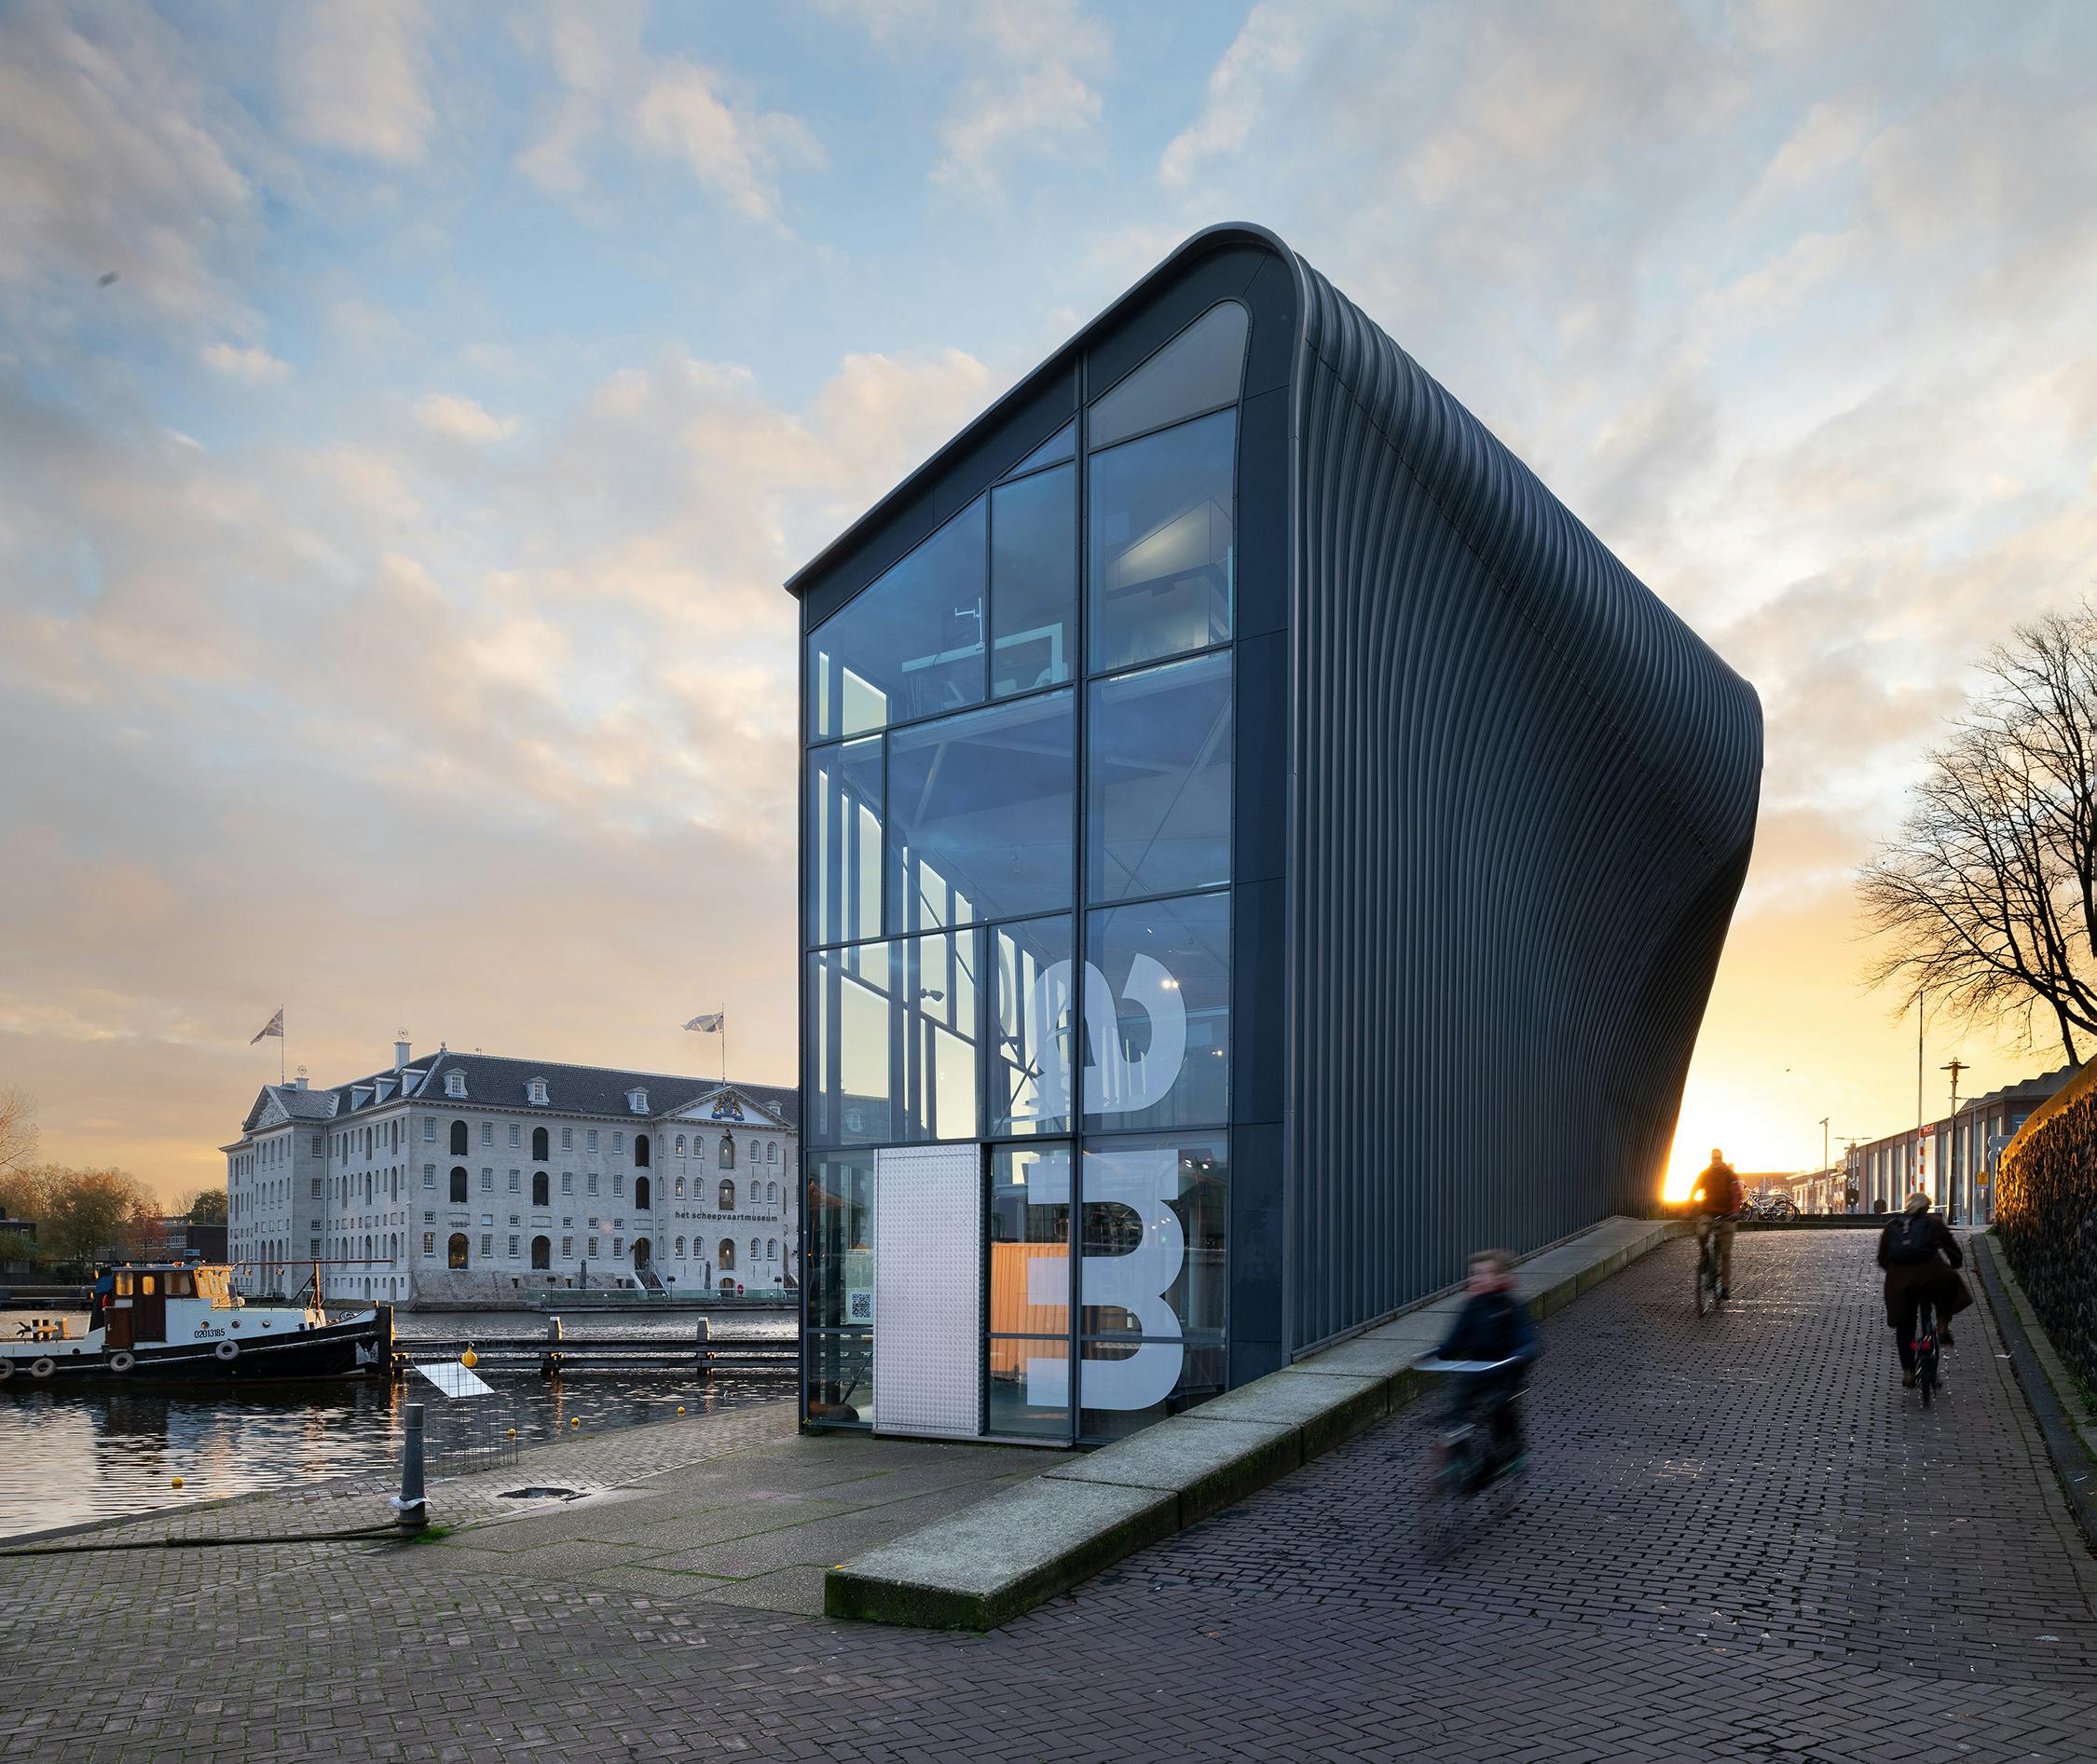 Arcam, the architectural centre of Amsterdam